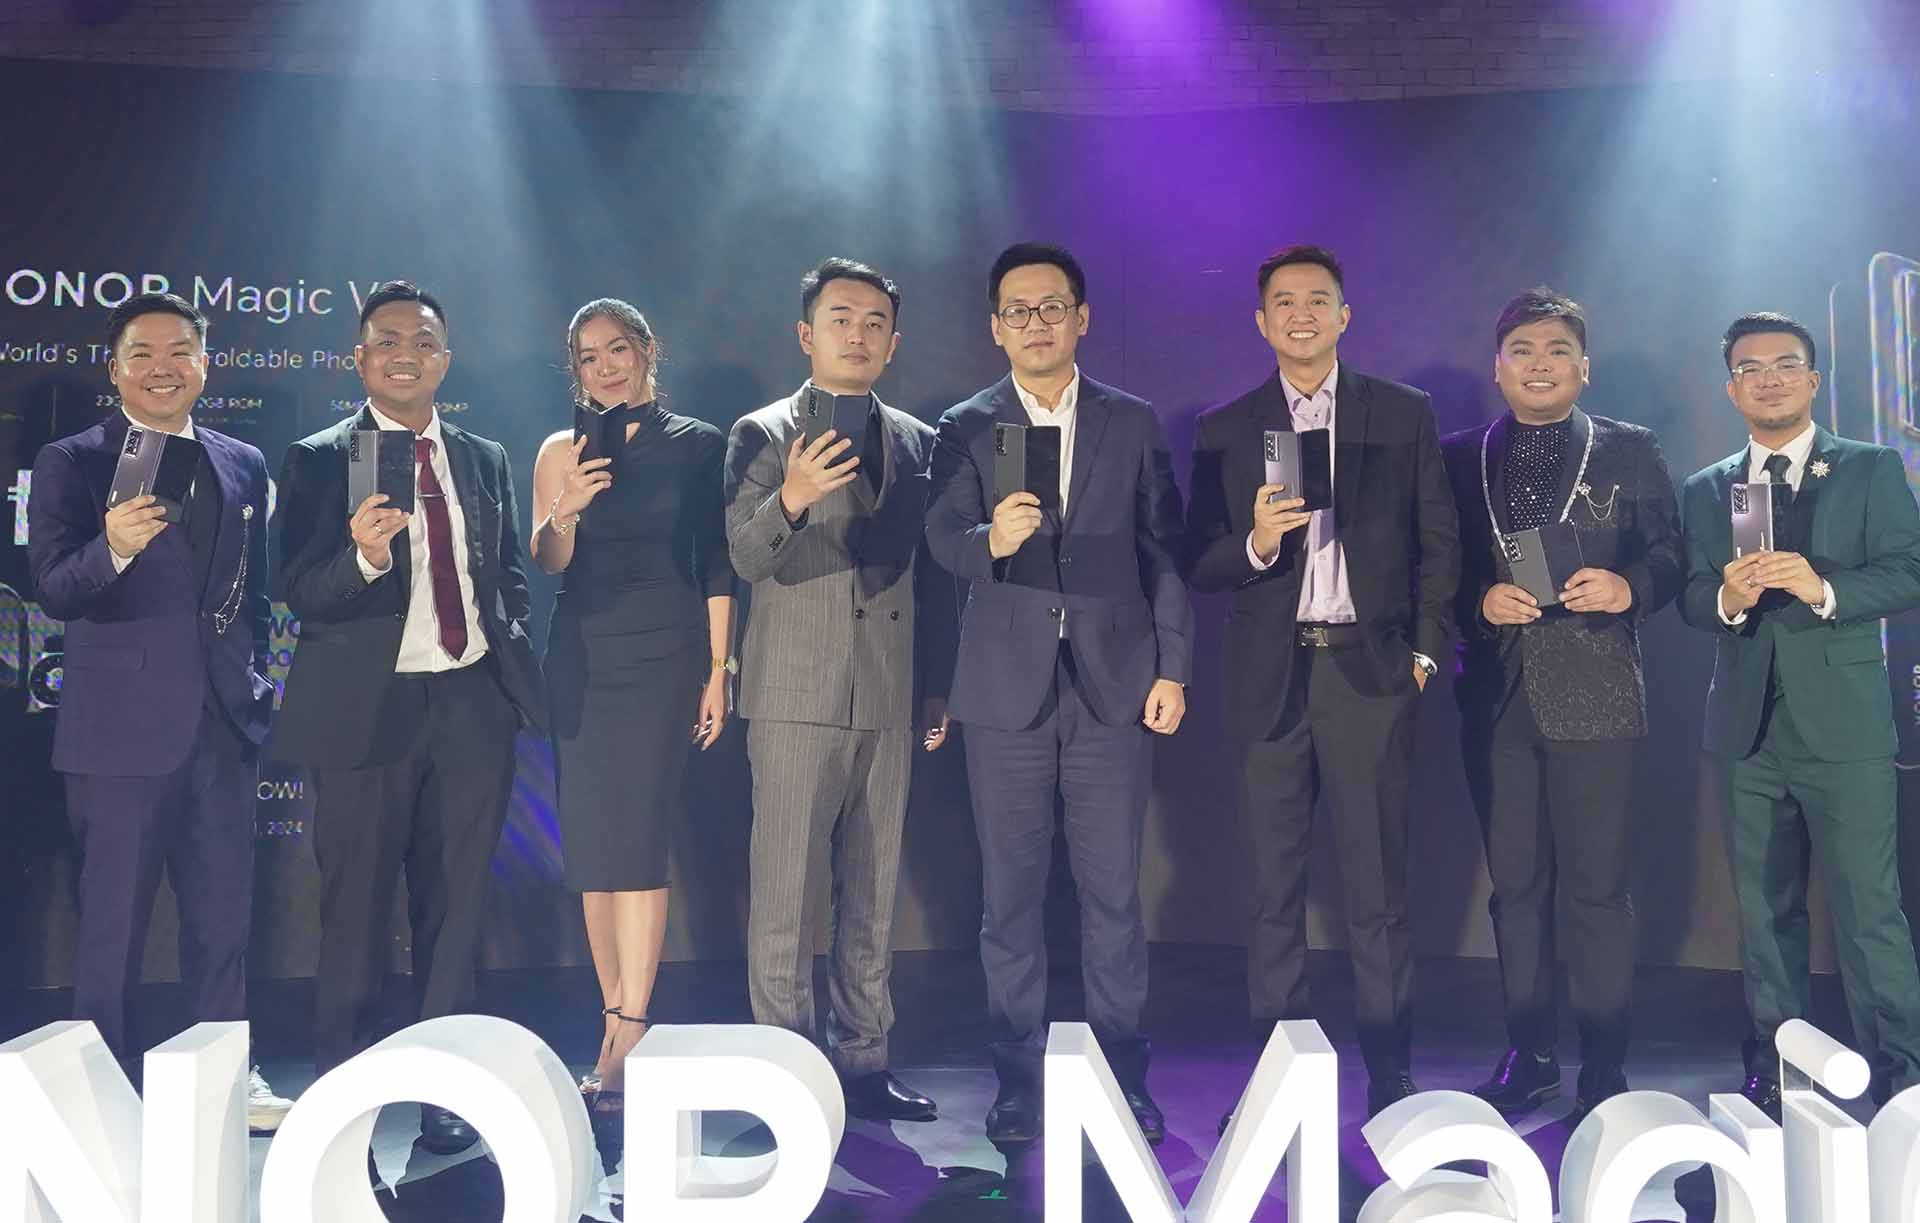 HONOR Philippines Executives on stage at the launch of HONOR Magic V2